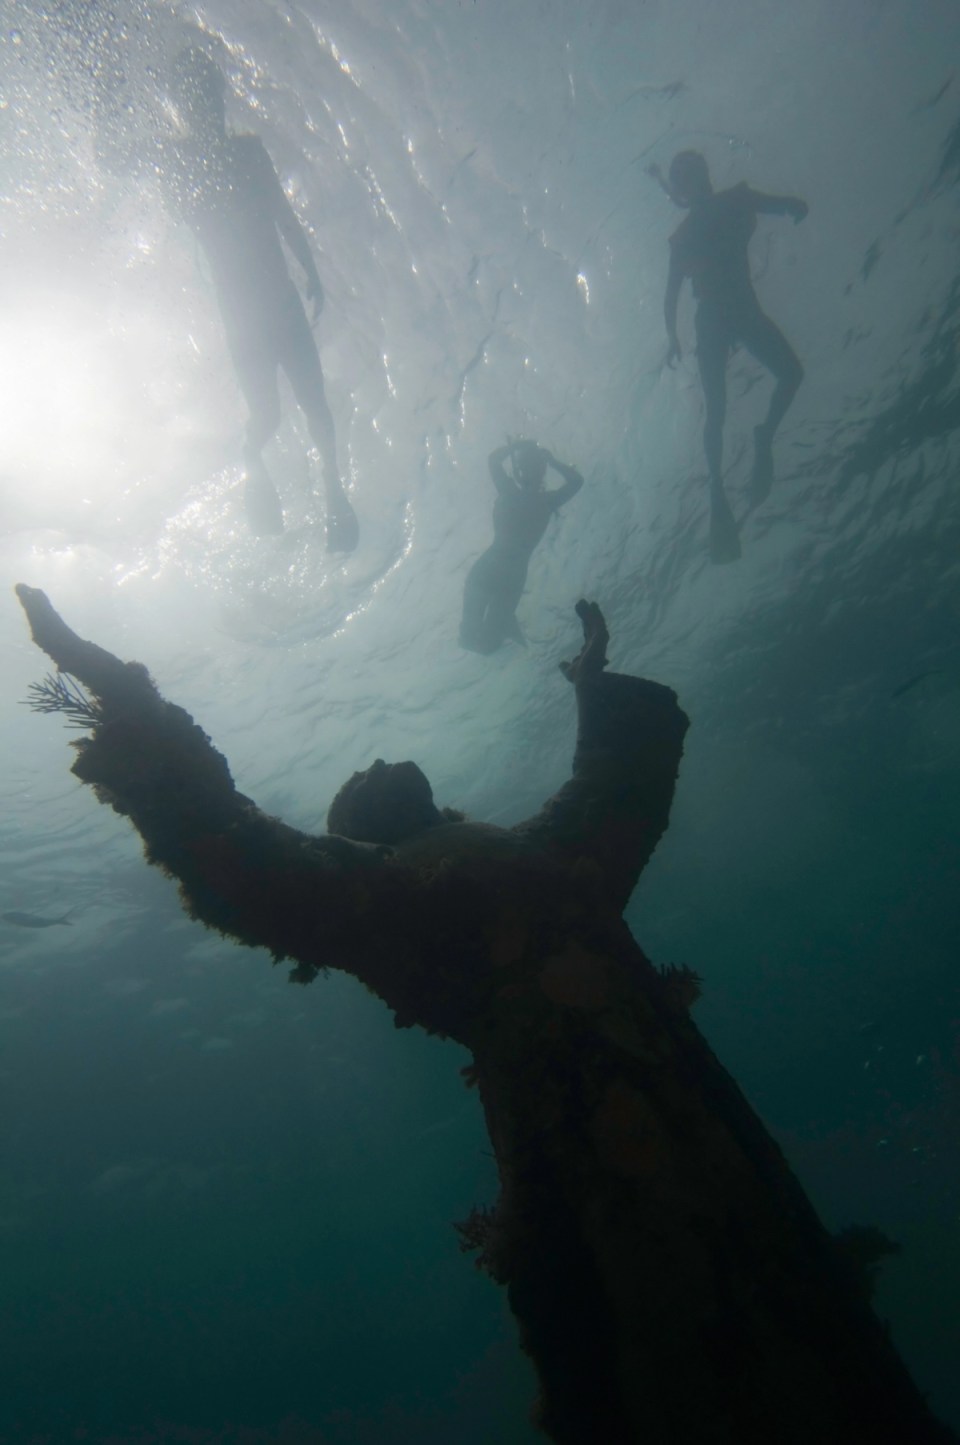 Group of snorkellers swimming over the Christ of the abyss, underwater bronze statue of Key Largo in Florida. Wide angle underwater shot against the sun, small aperture, ProPhoto RGB. Original was created by late Italian sculptor Guido Galletti and placed near Genoa, Italy. In 1965 replica was made, donated and placed in 25 feet deep waters of Key Largo in Florida. Since then it is one of the most famous and popular dive sites in USA.